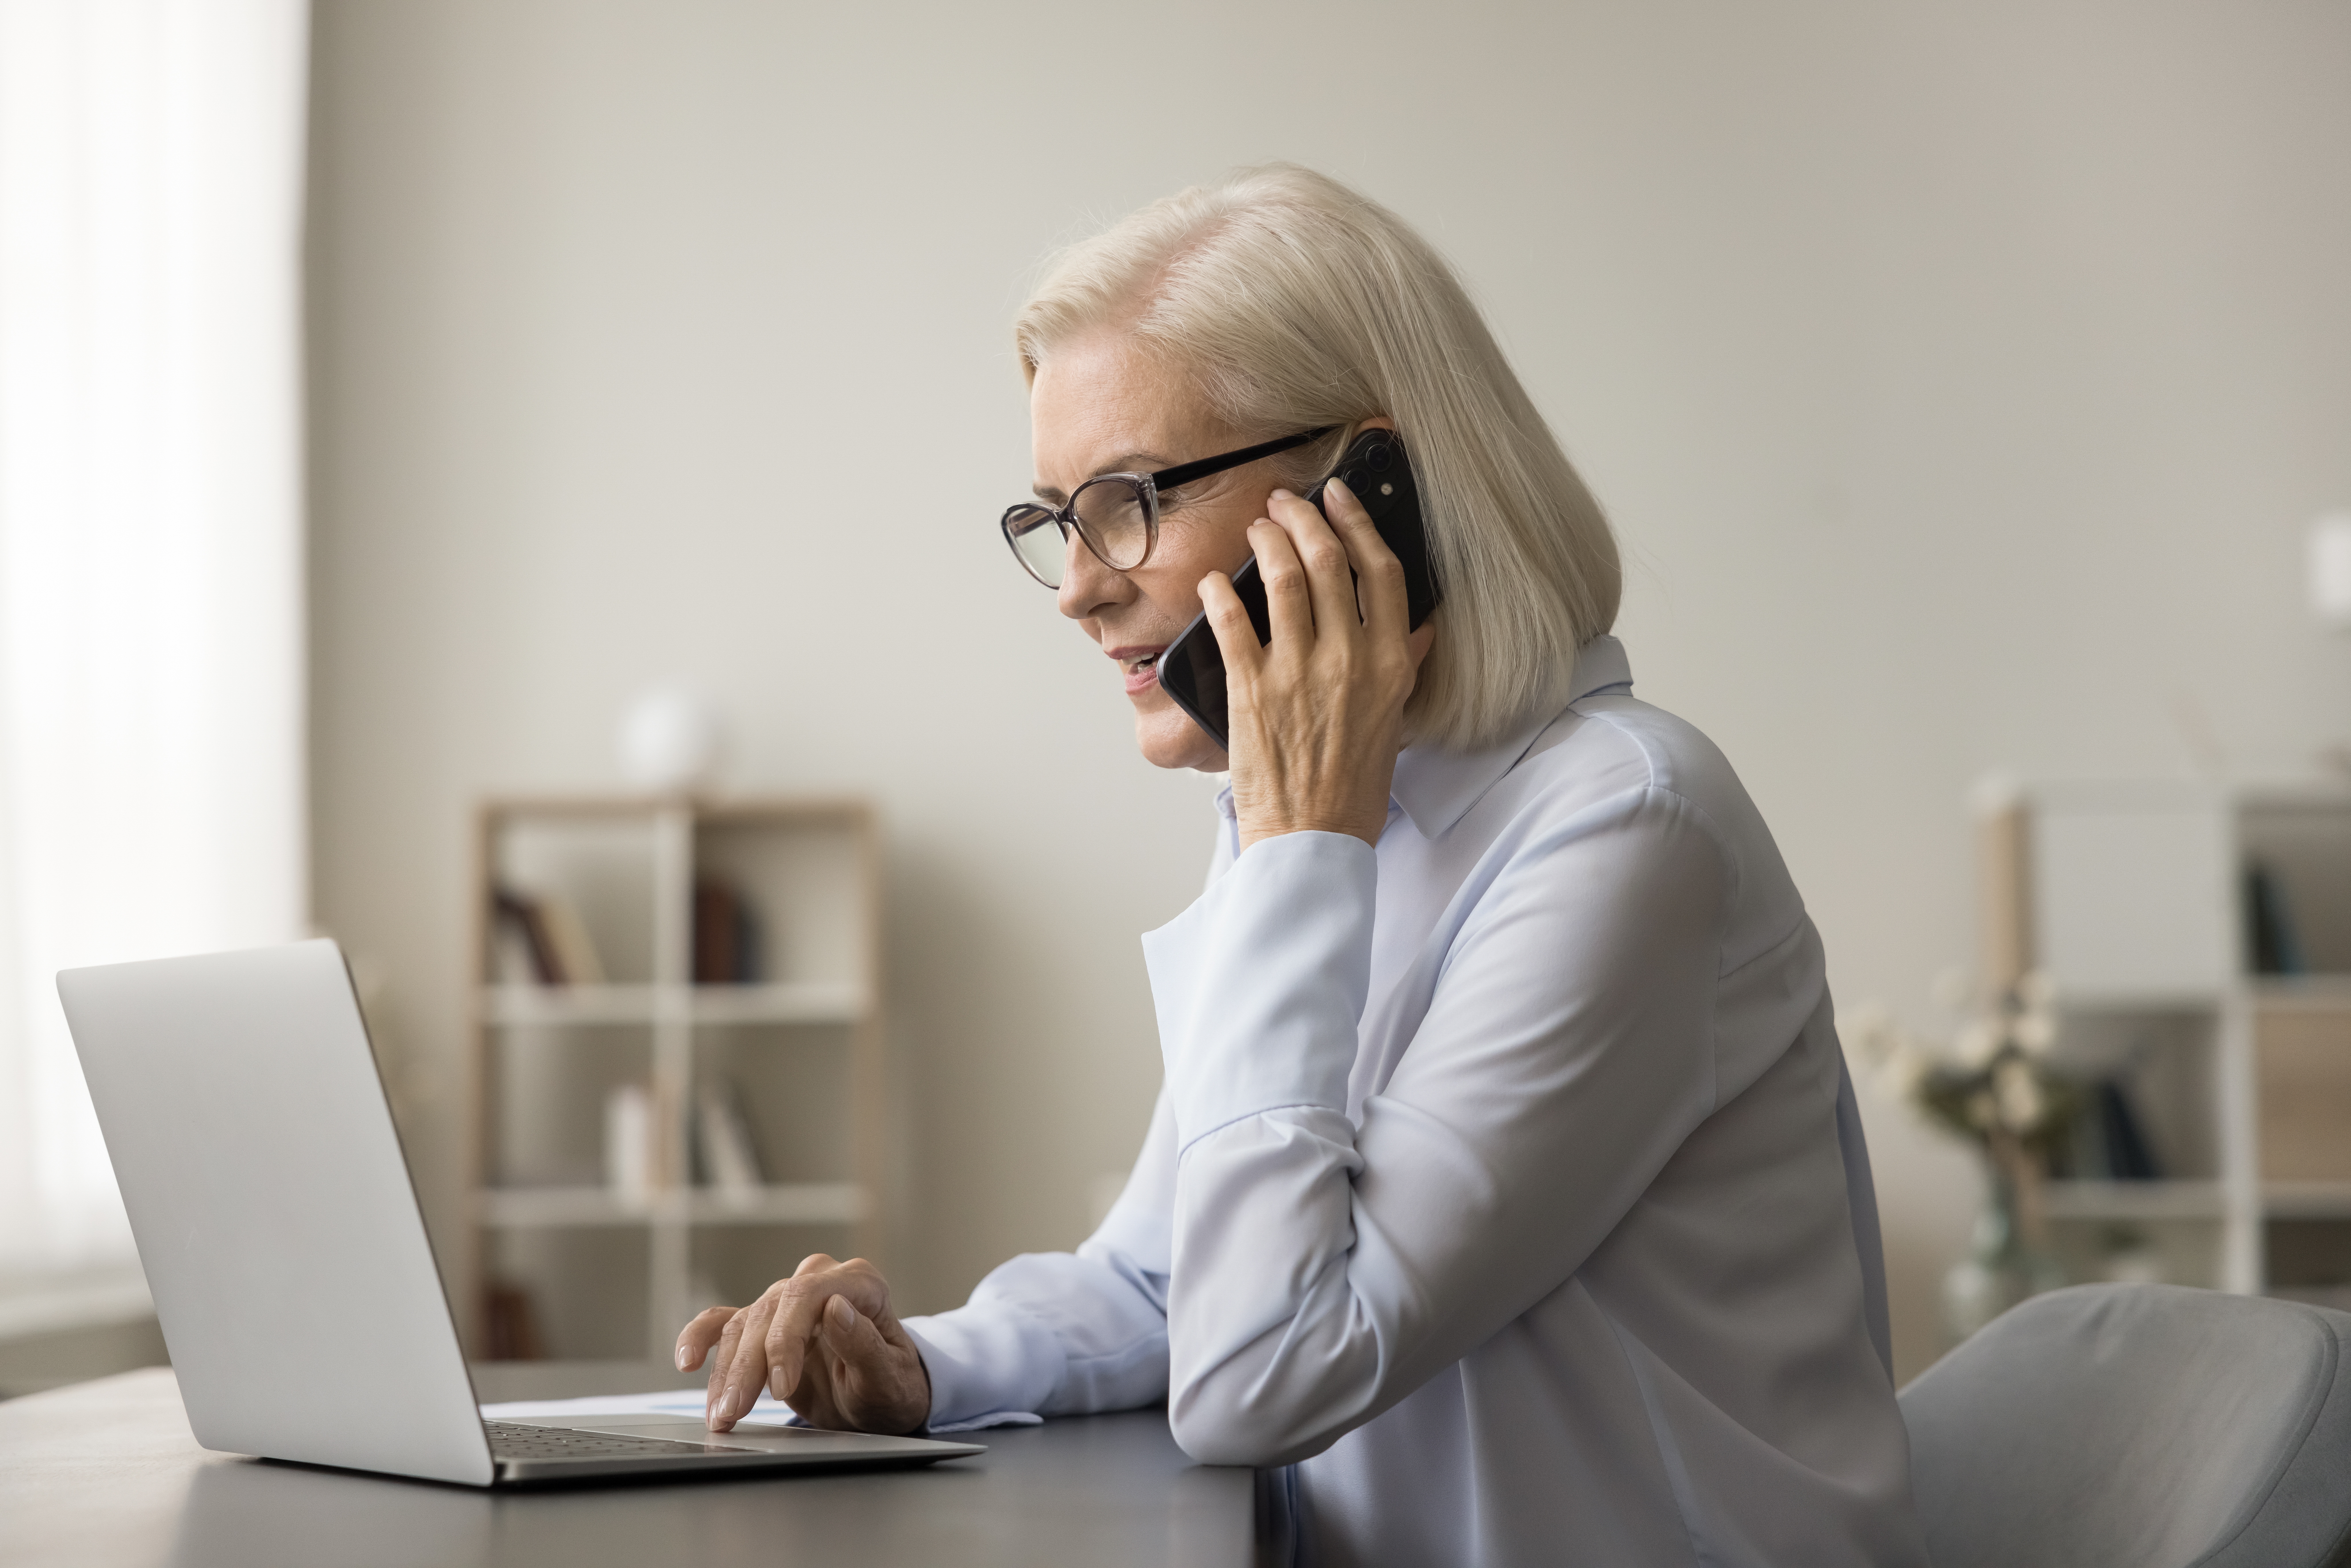 An older woman on the phone while looking at a laptop | Source: Shutterstock